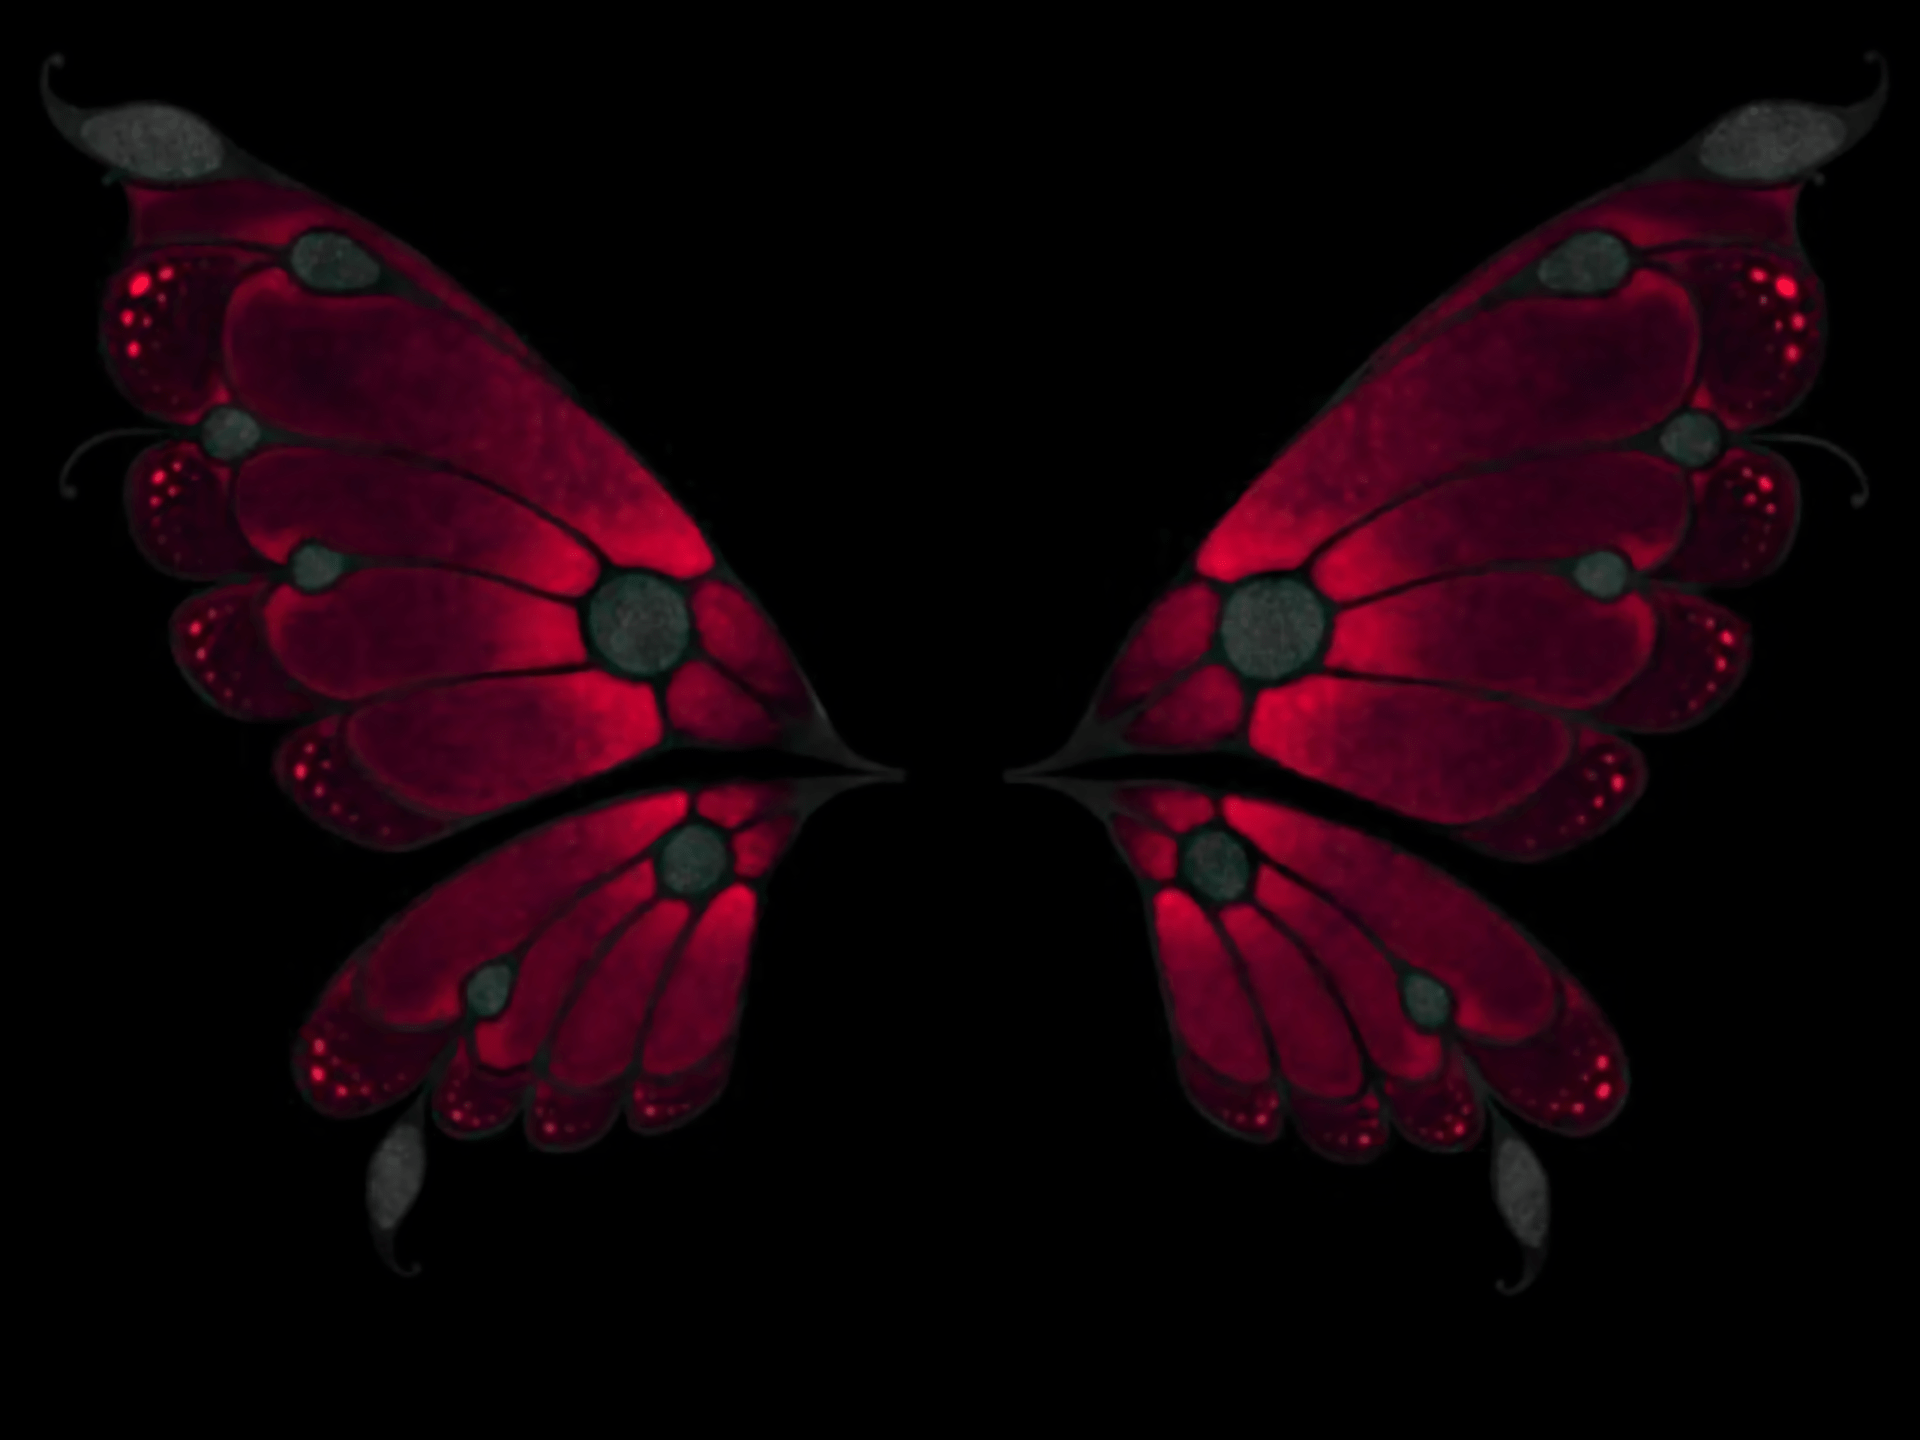 A pair of red butterfly wings with black spots on the edges - Wings